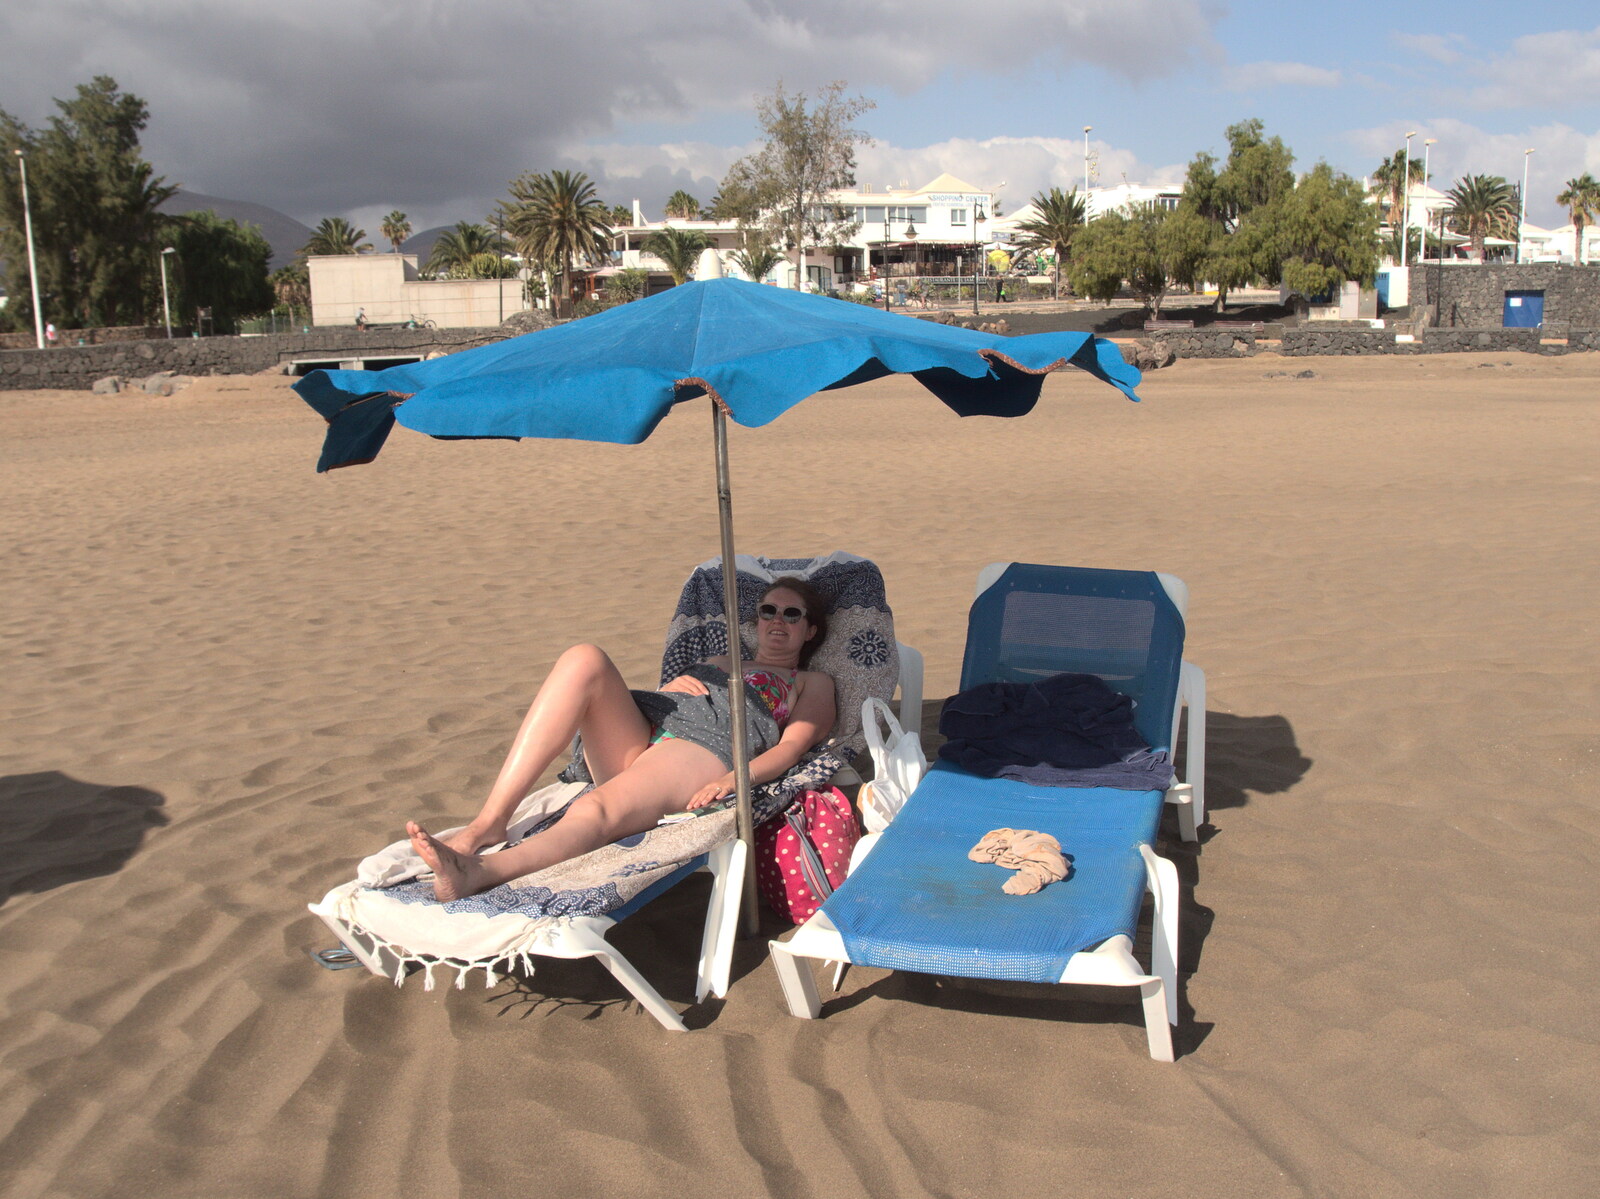 We hire some sunbeds for an hour or so from The Volcanoes of Lanzarote, Canary Islands, Spain - 27th October 2021